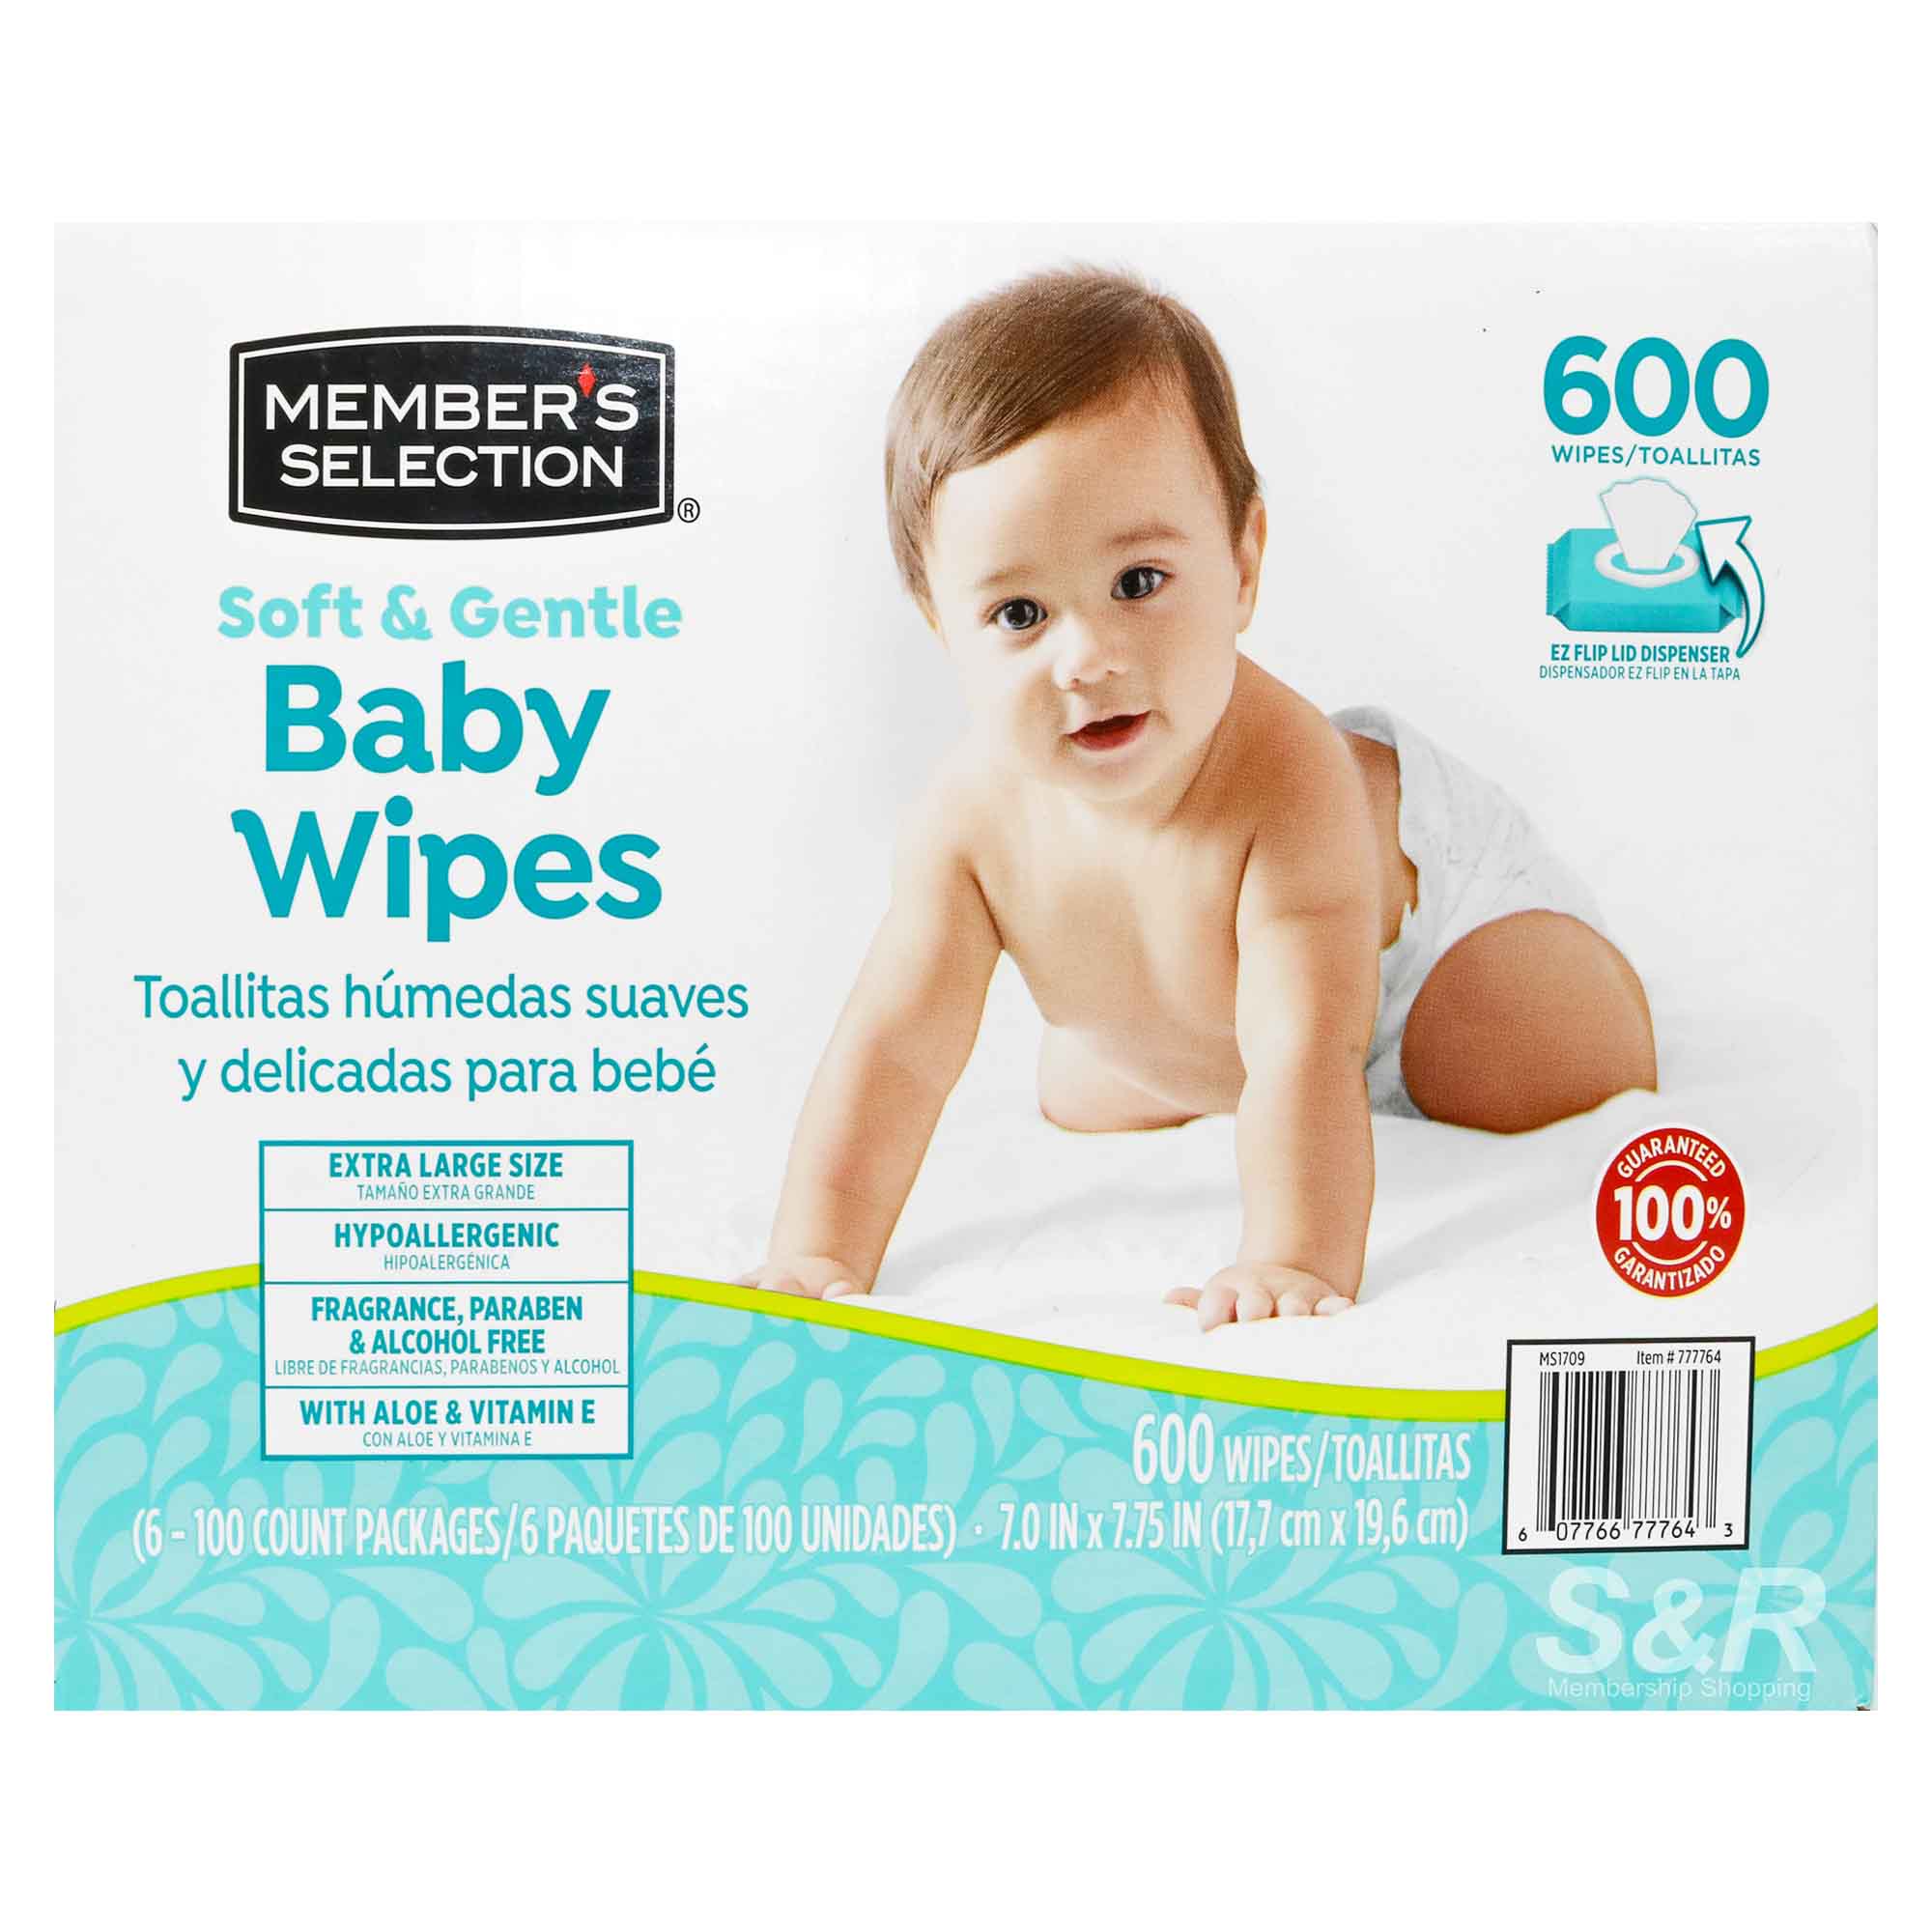 Member's Selection Soft and Gentle Baby Wipes 600 sheets